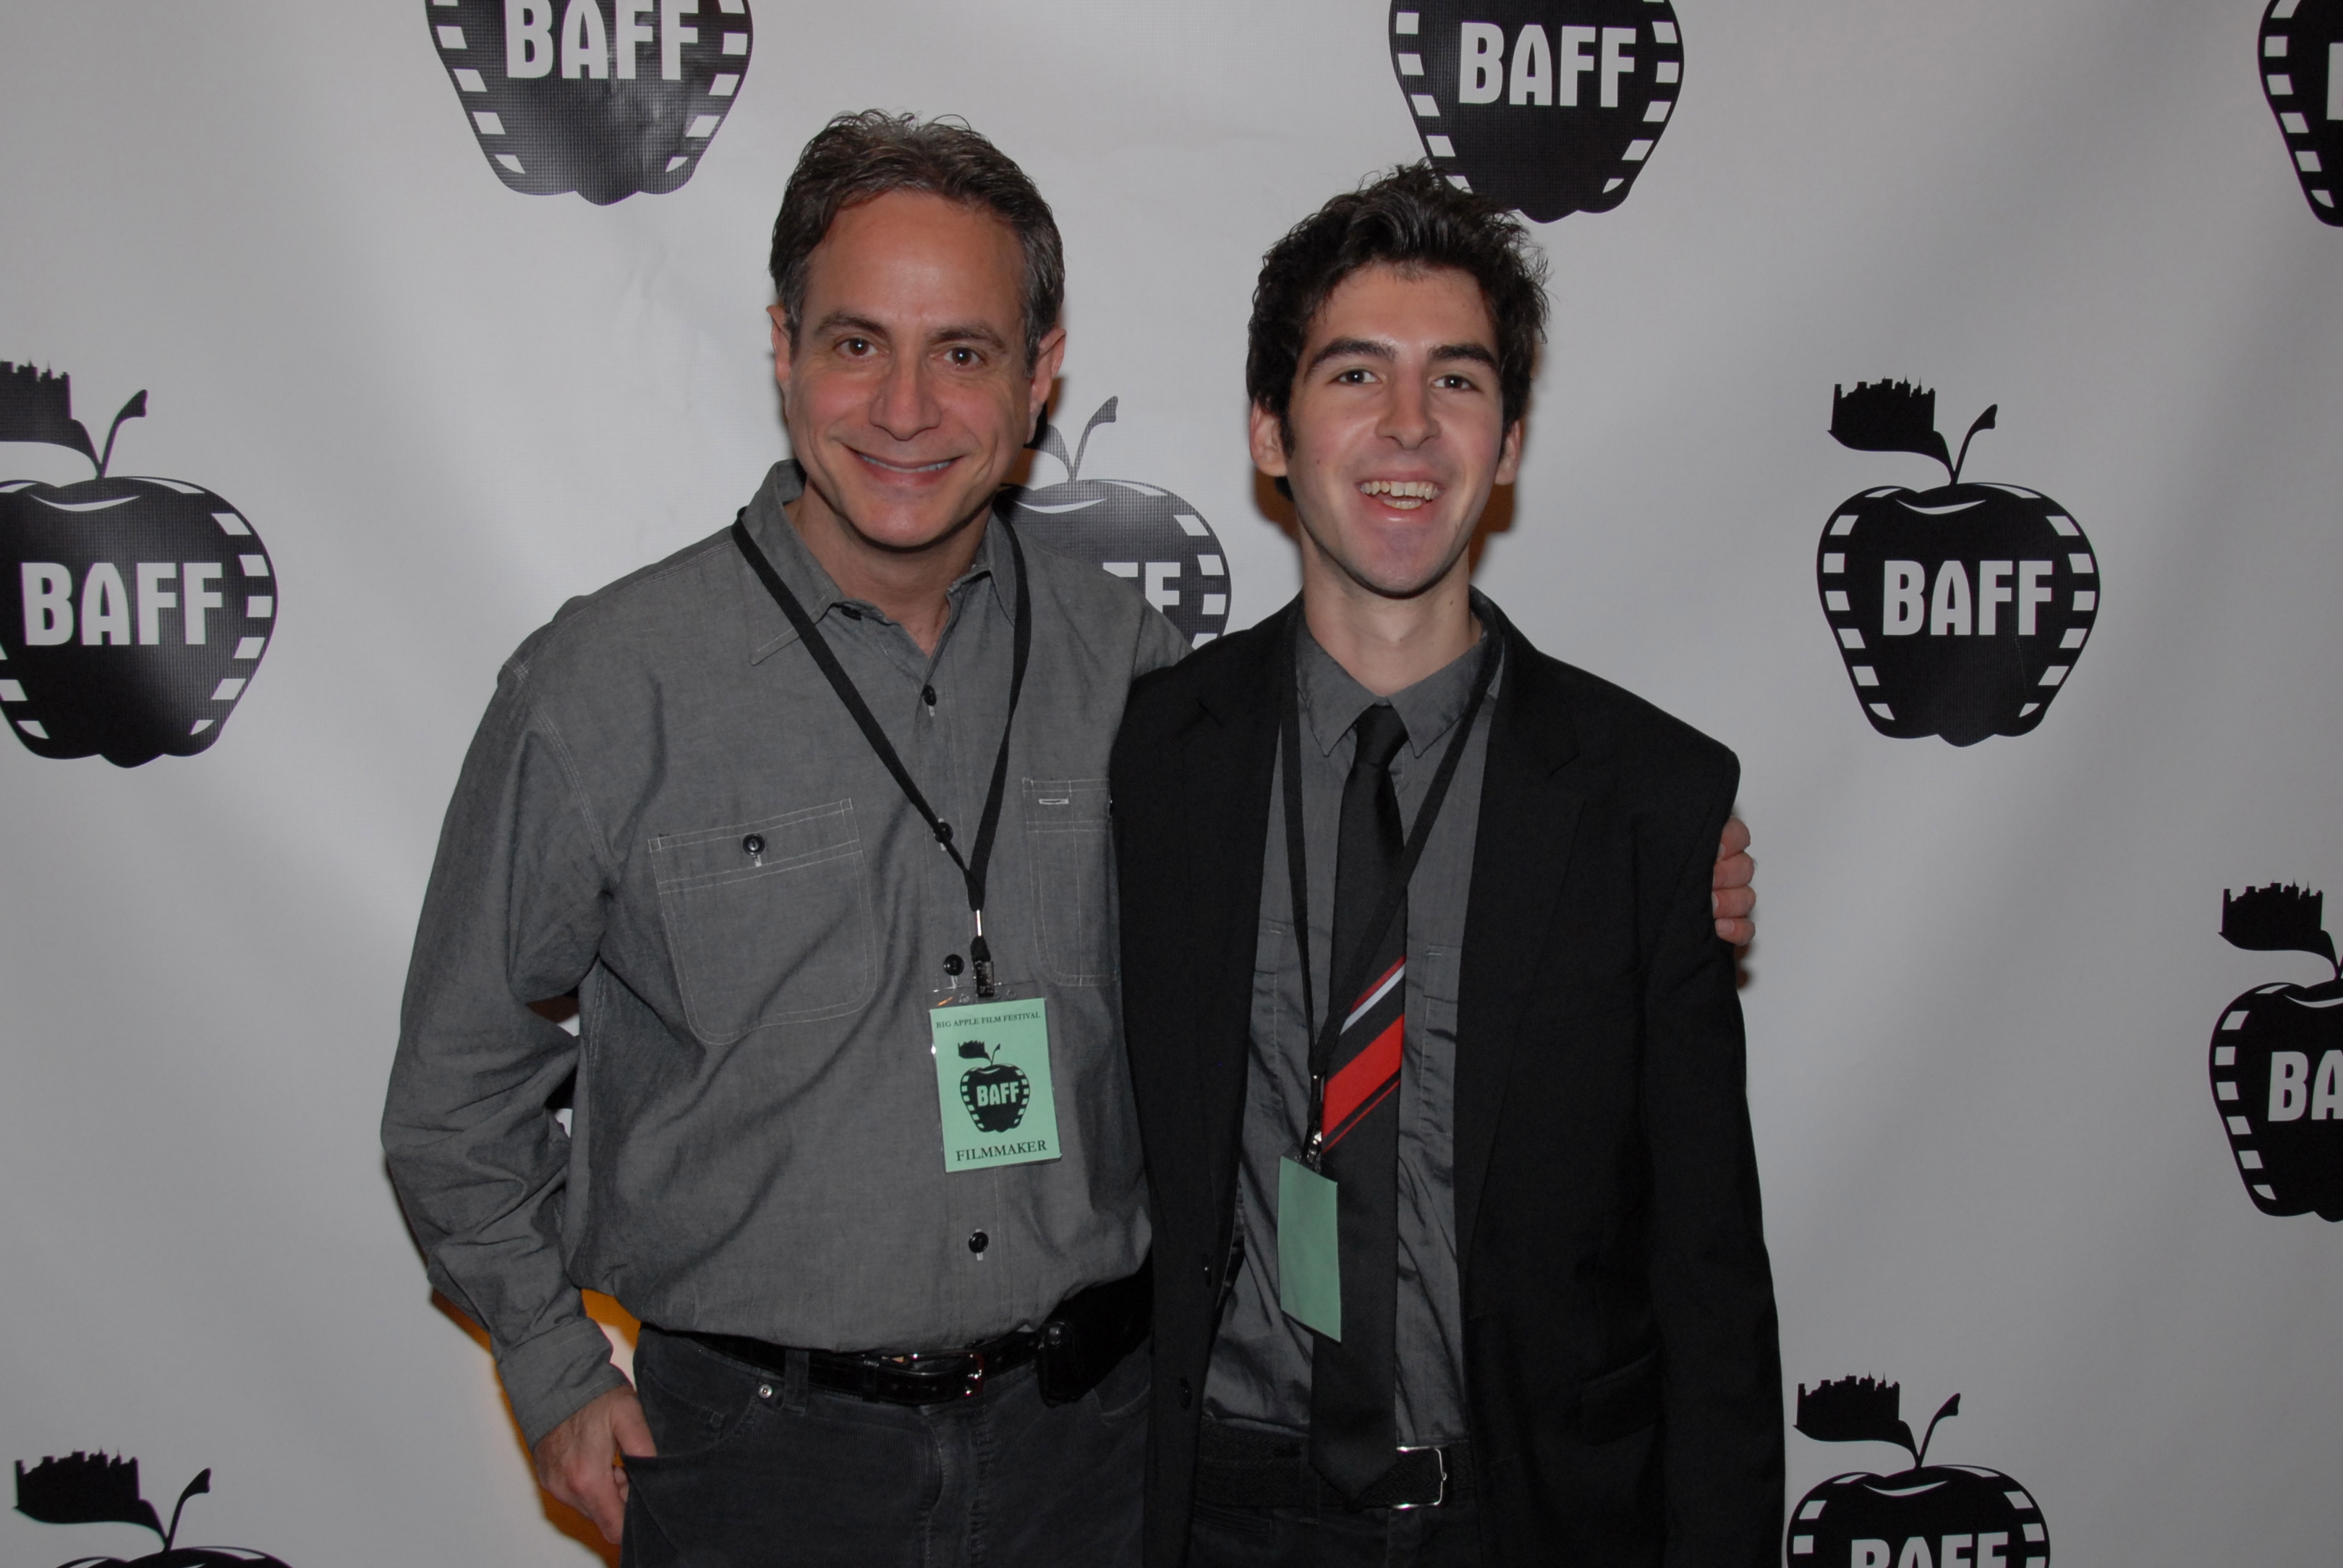 Big Apple Film Festival 2013 with Paul & The Enemy director/writer Jeremy Schaftel